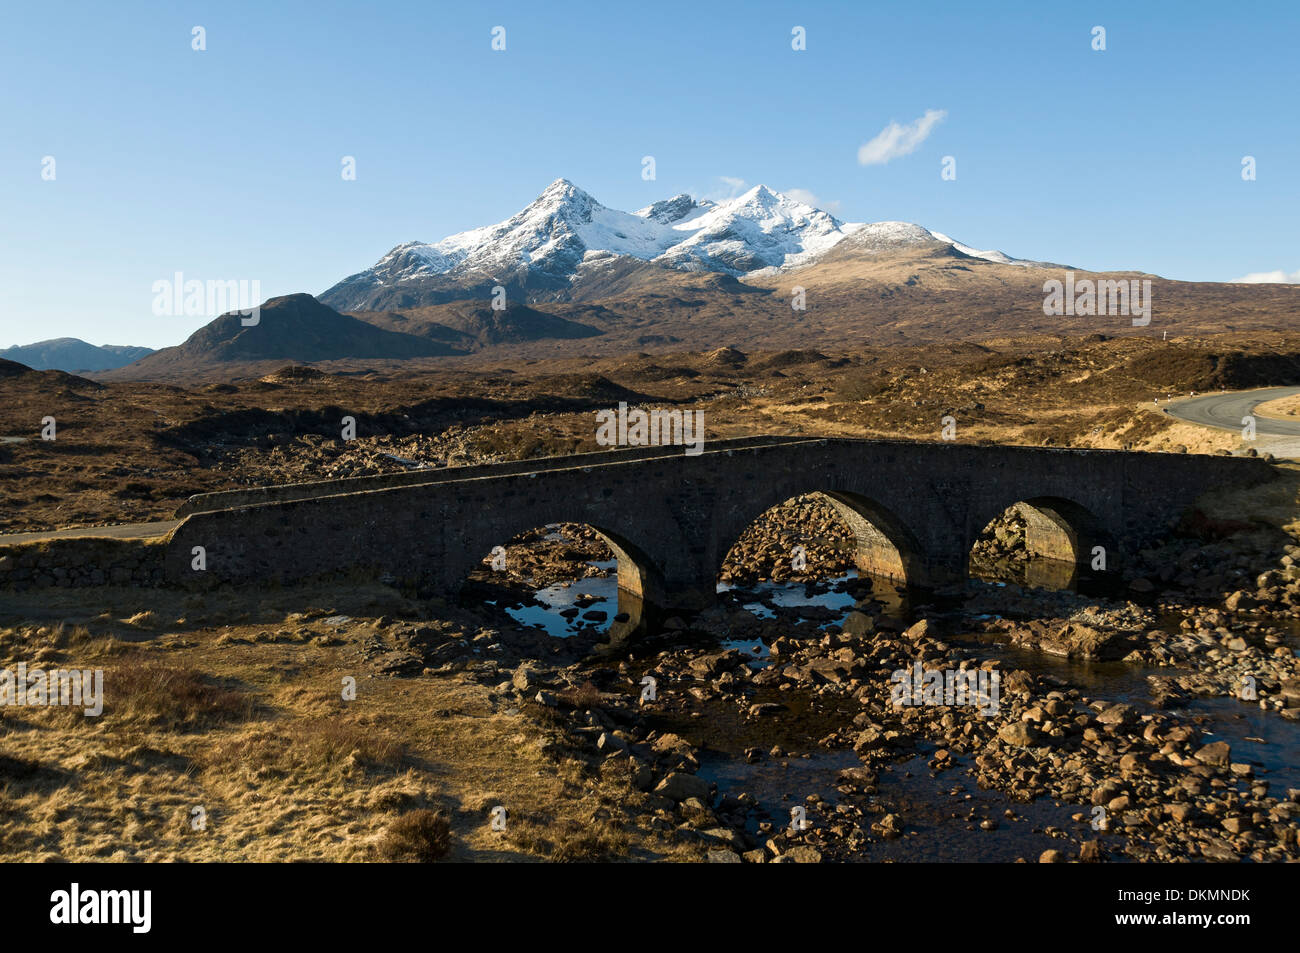 Sgurr nan Gillean and the Cuillin mountains, from the old bridge at Sligachan, Isle of Skye. Highland region, Scotland, UK. Stock Photo